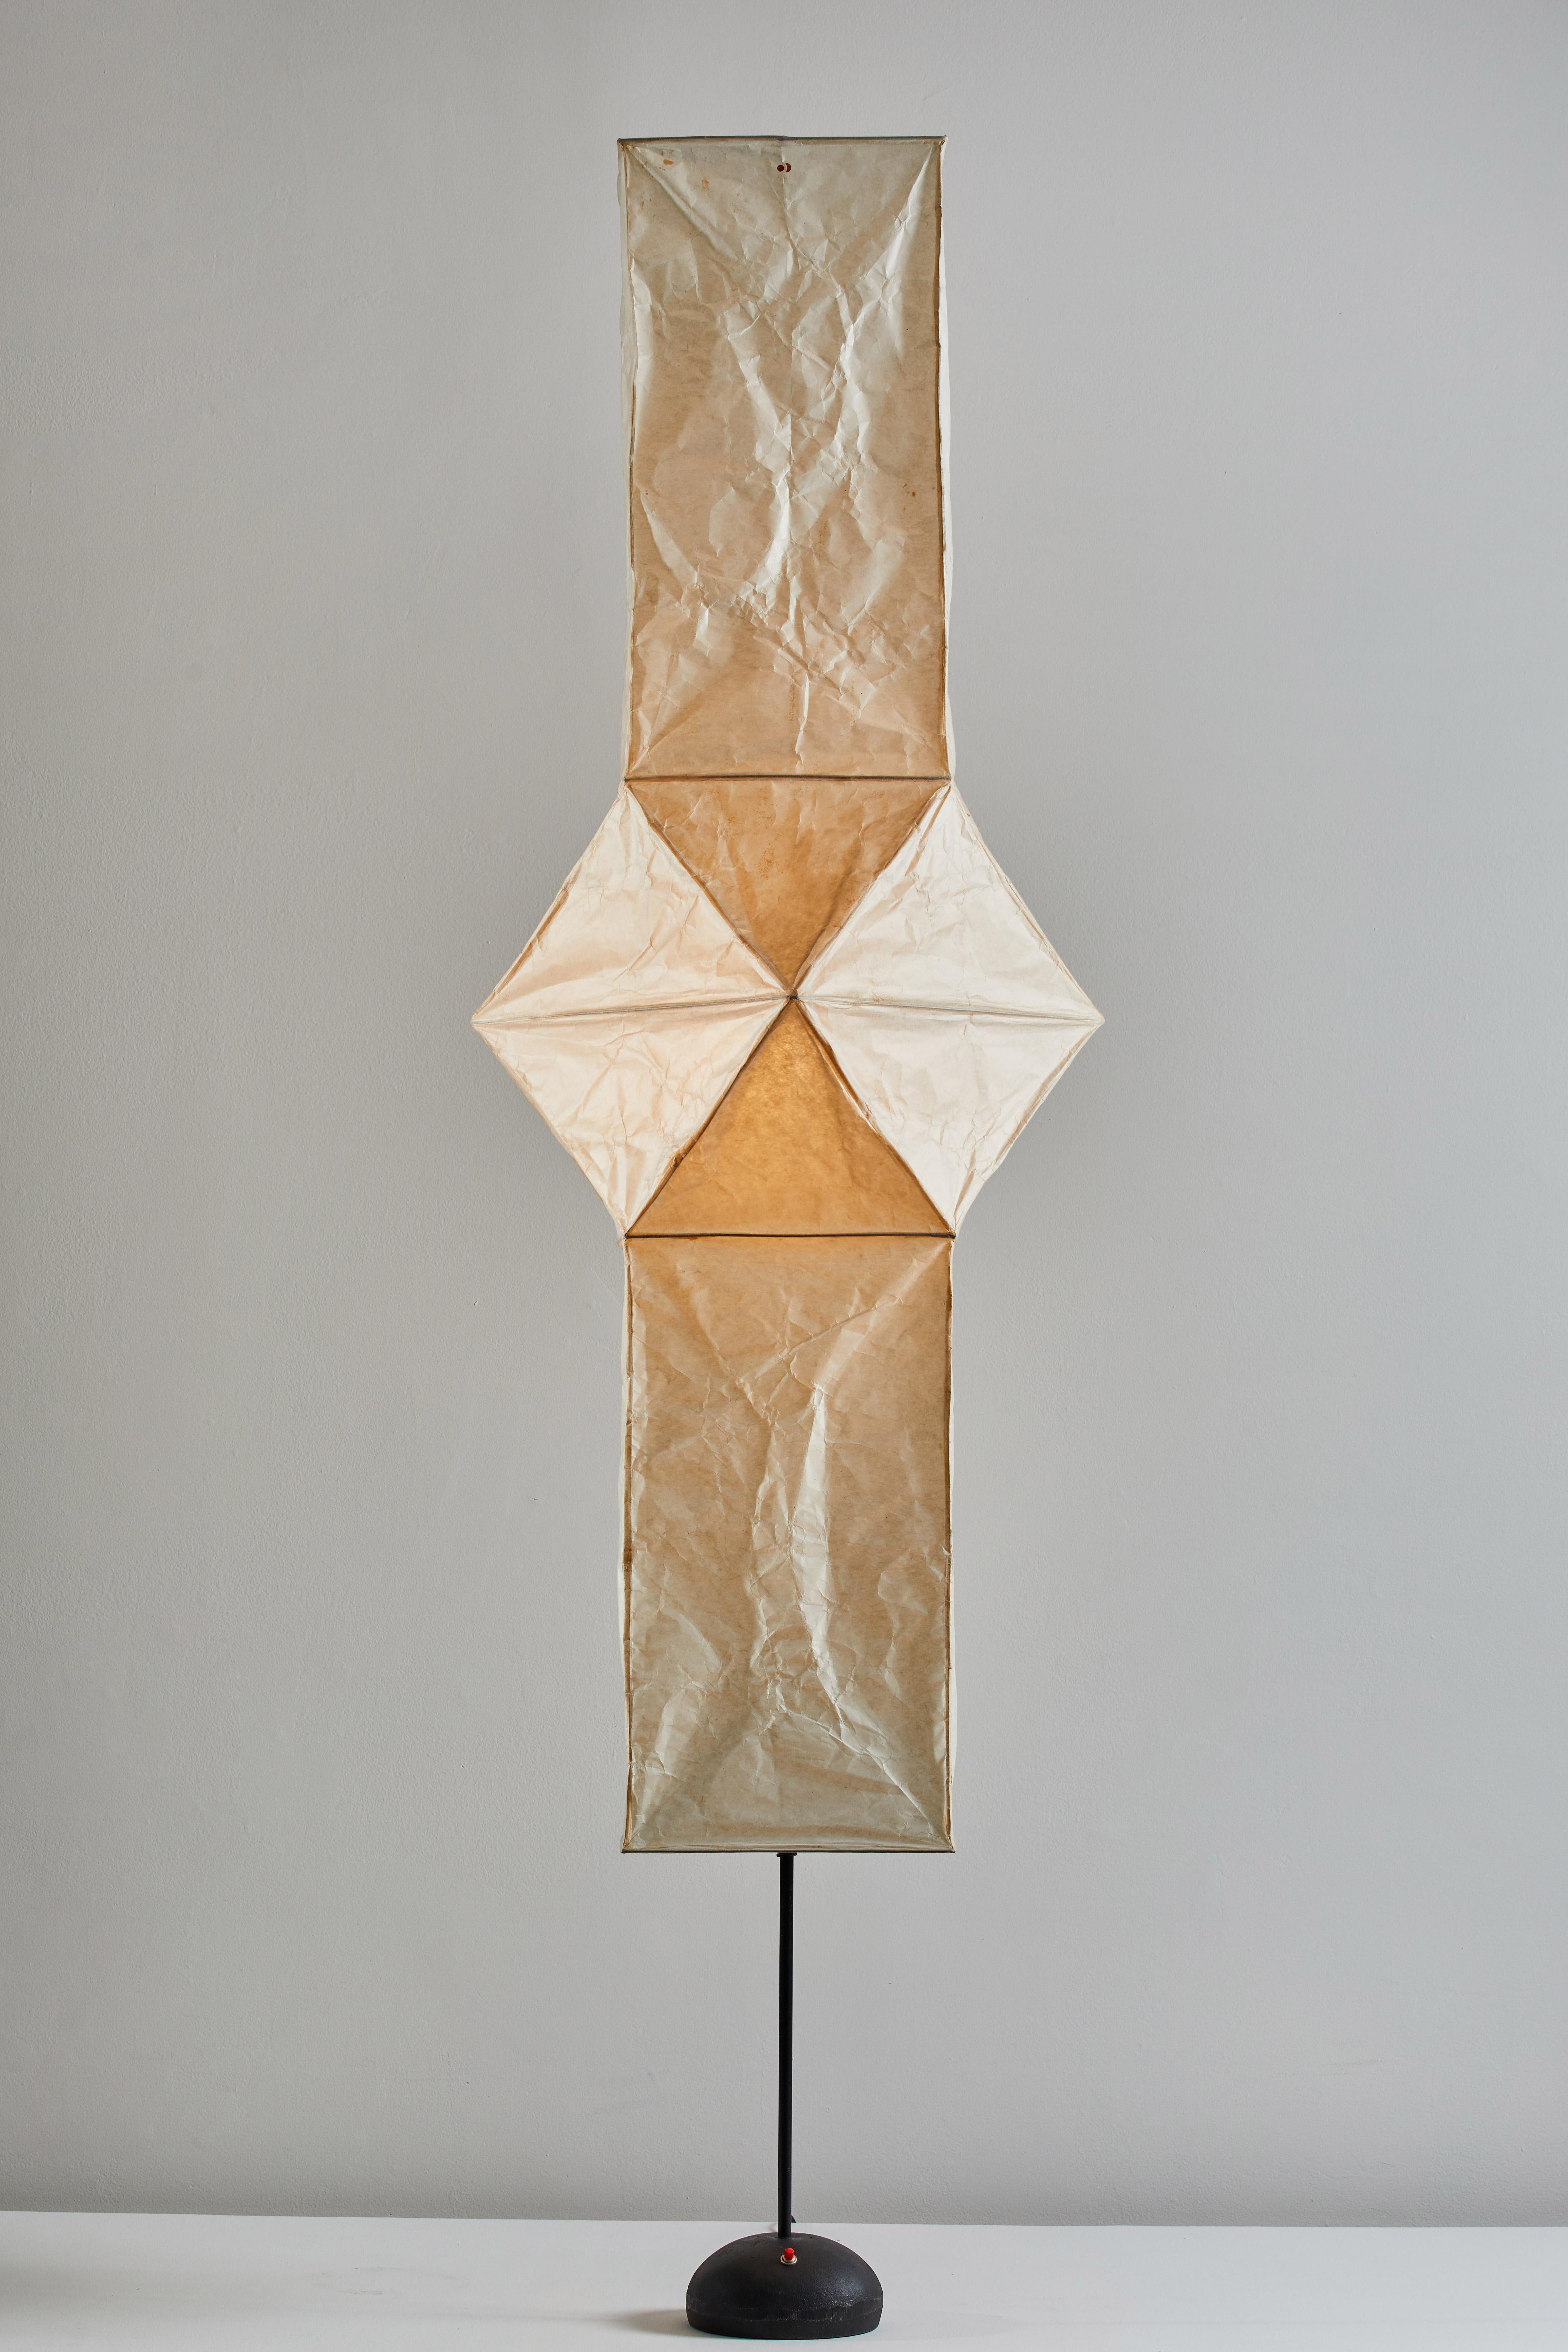 Model UF4-L5 floor lamp by Isamu Noguchi for Akari. Designed and manufactured in Japan circa 1970s. Washi rice paper, bamboo ribbing, enameled metal frame, steel base with signature. Original Sun/Moon stamp. Takes one E27 75w maximum bulb. Bulbs